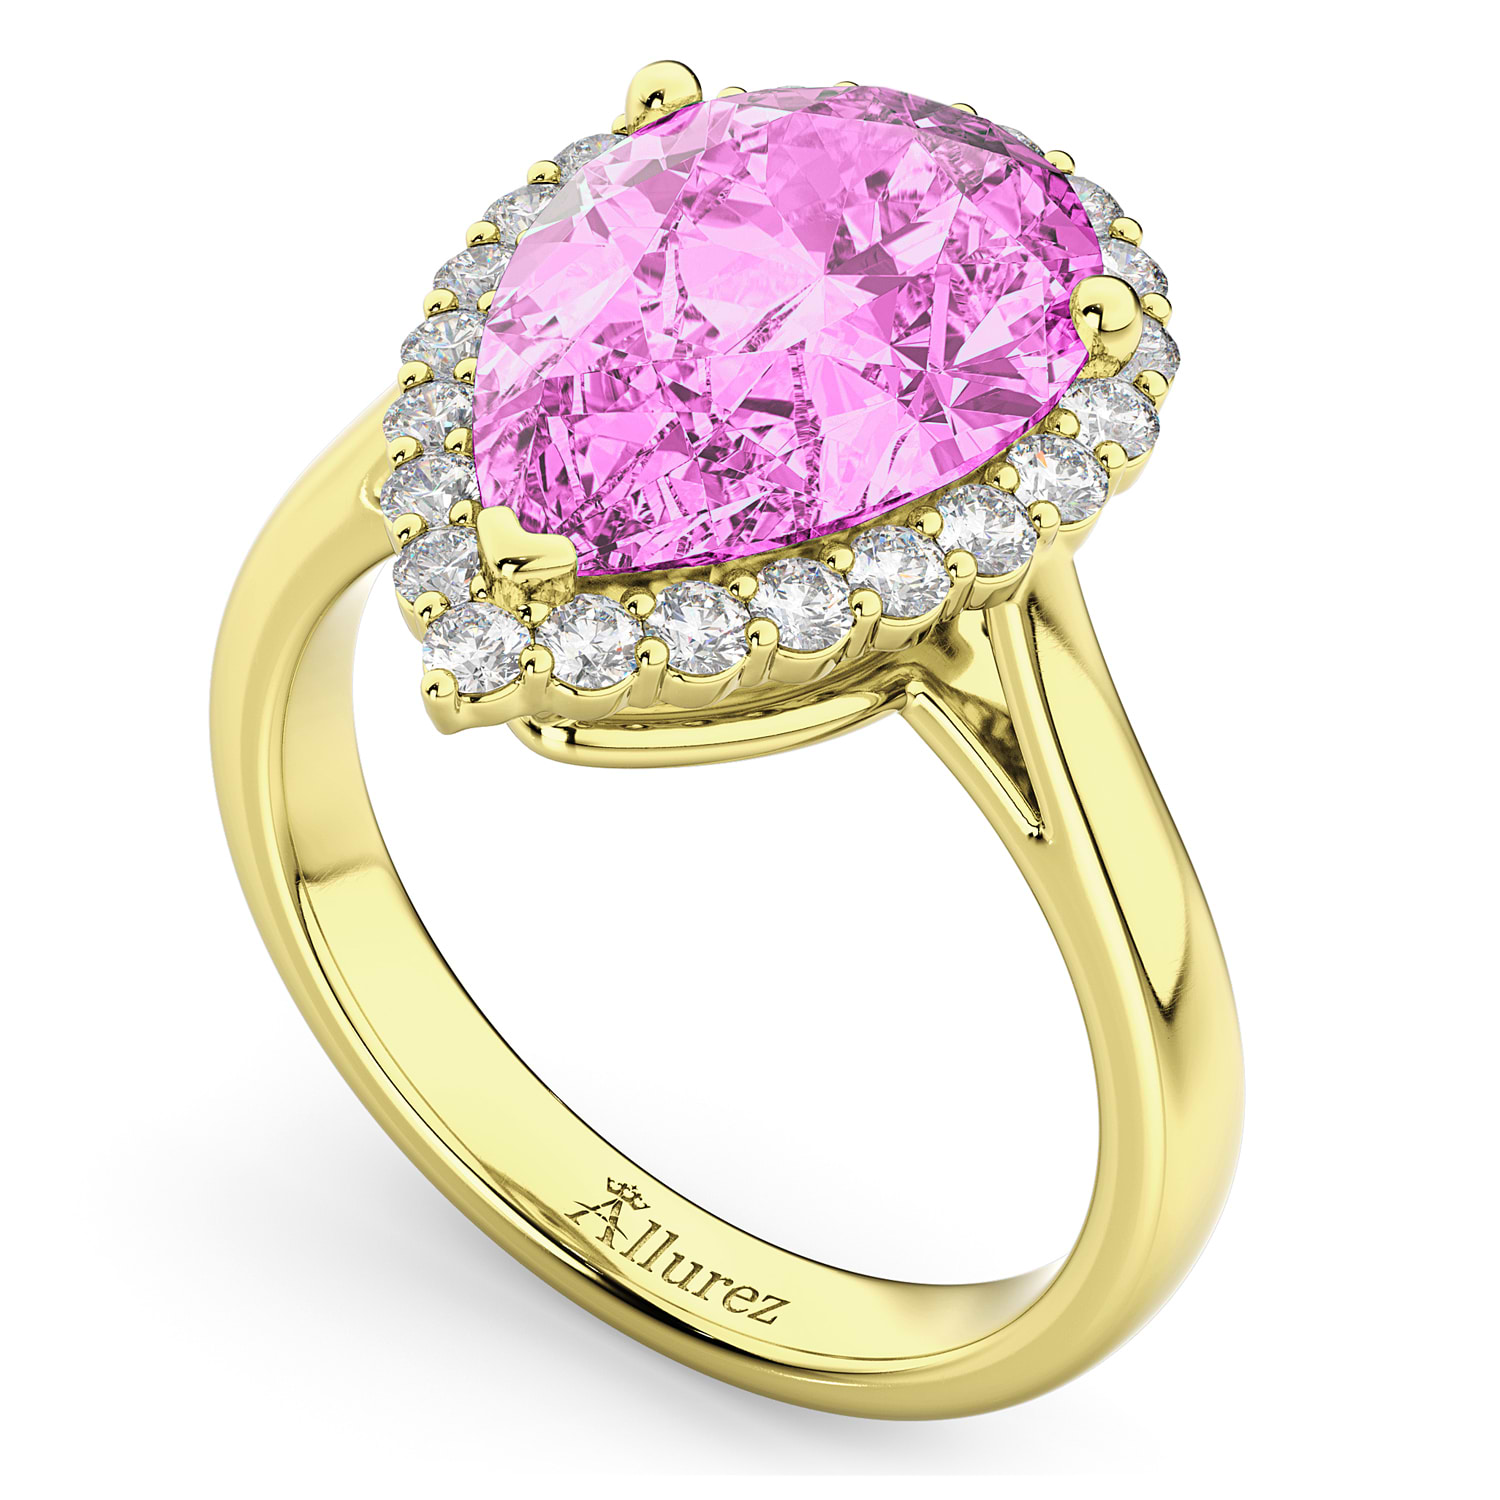 Pear Cut Halo Pink Sapphire & Diamond Engagement Ring 14K Yellow Gold 8.34ct